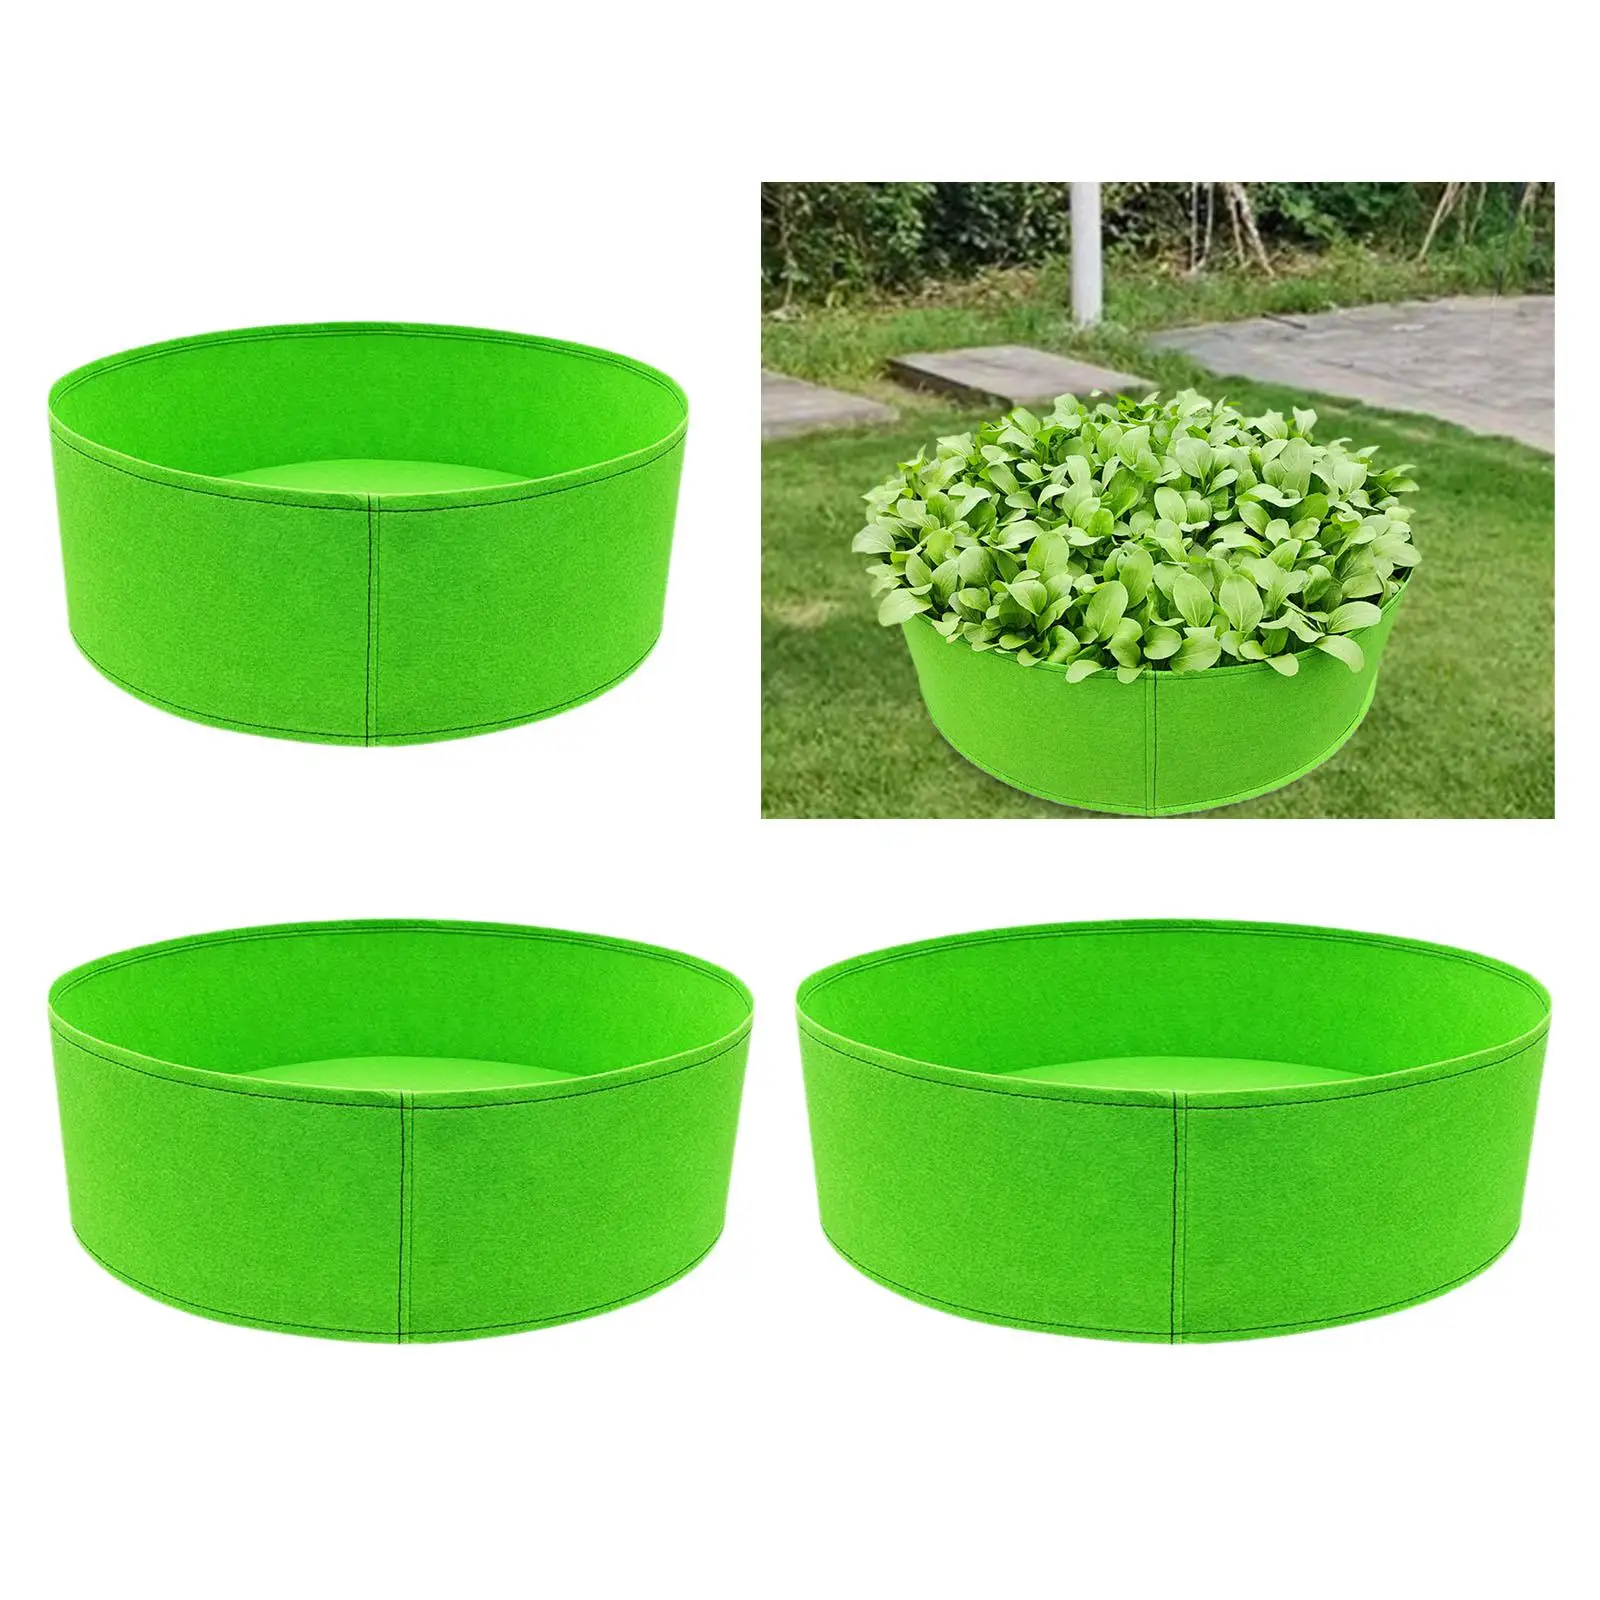 Thickened Garden Planting Beds Reusable Non Woven Plant planting pouch growing pot for Greenhouse Roofs Garden Indoor Back Porch